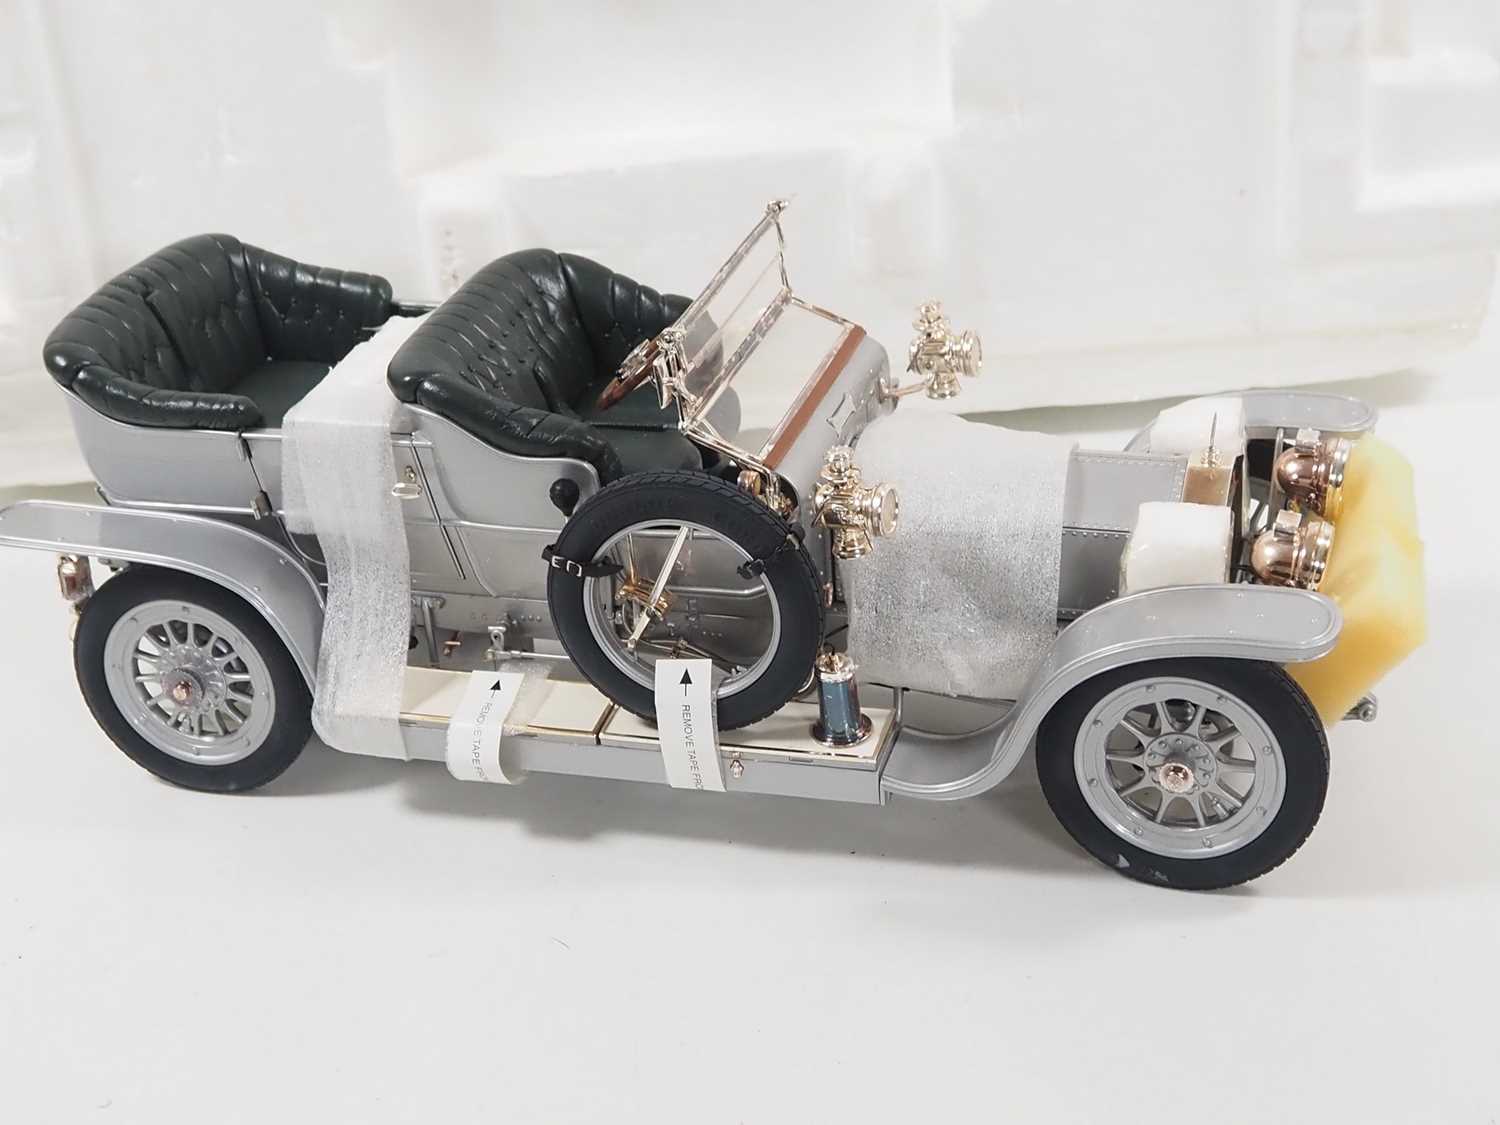 A FRANKLIN MINT 1:12 scale diecast 1907 Rolls Royce Silver Ghost - appears undisplayed in original - Image 2 of 8